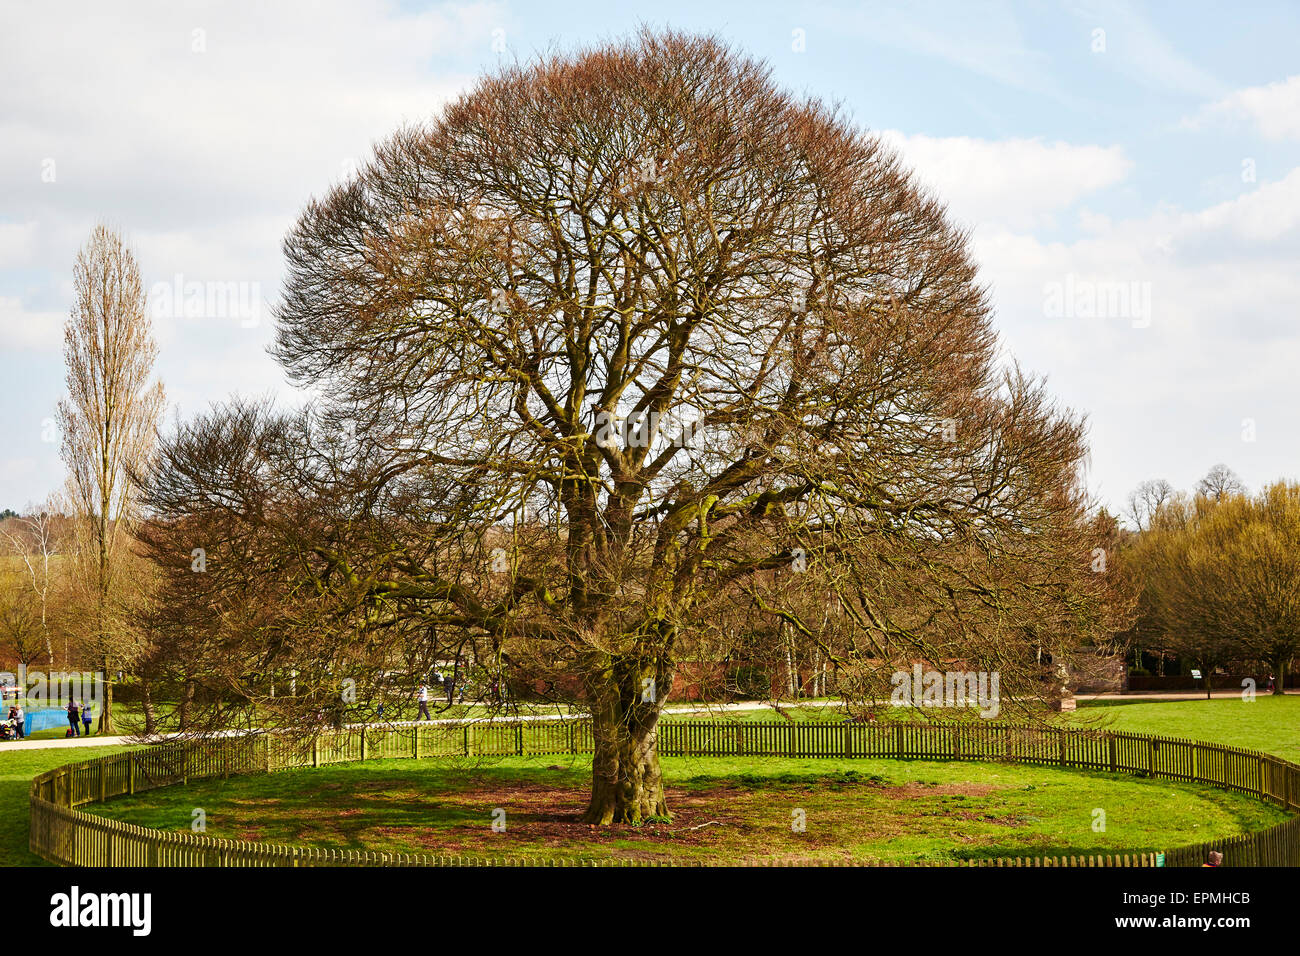 Large old beech tree at Rufford Abbey Country Park, Nottinghamshire, England, UK. Stock Photo